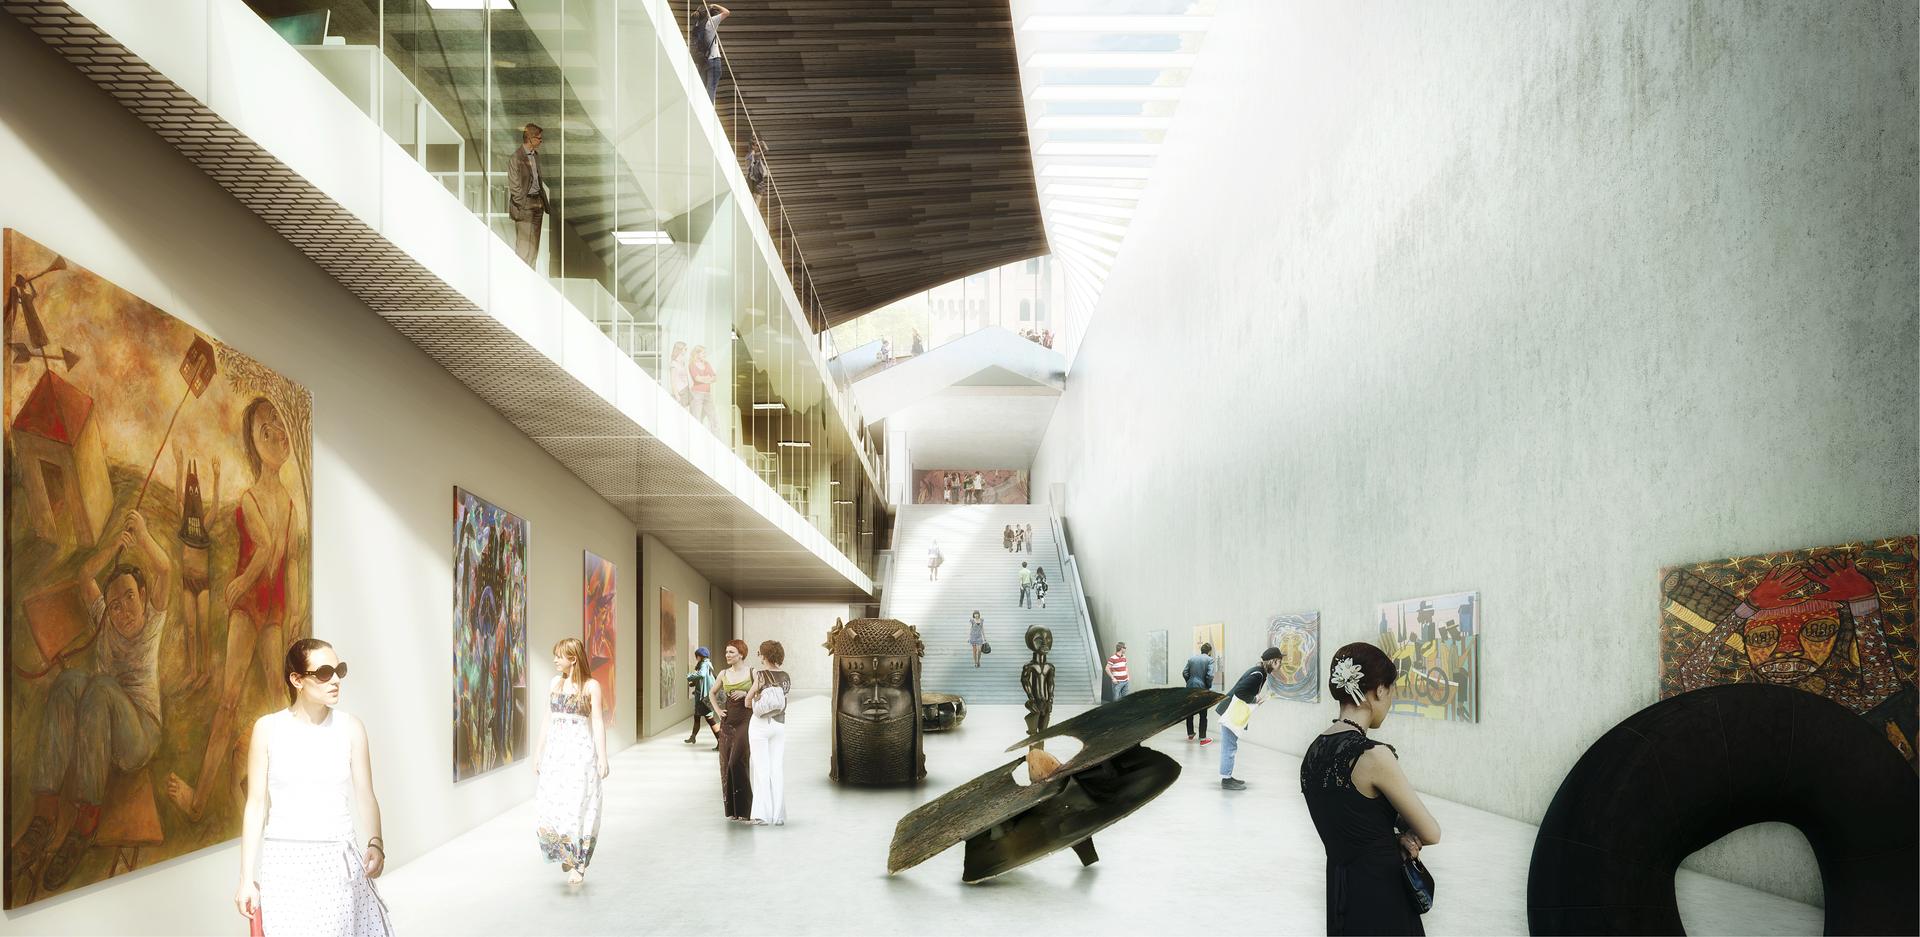 A rendering shows a skylit the entrance to the African Art Museum.